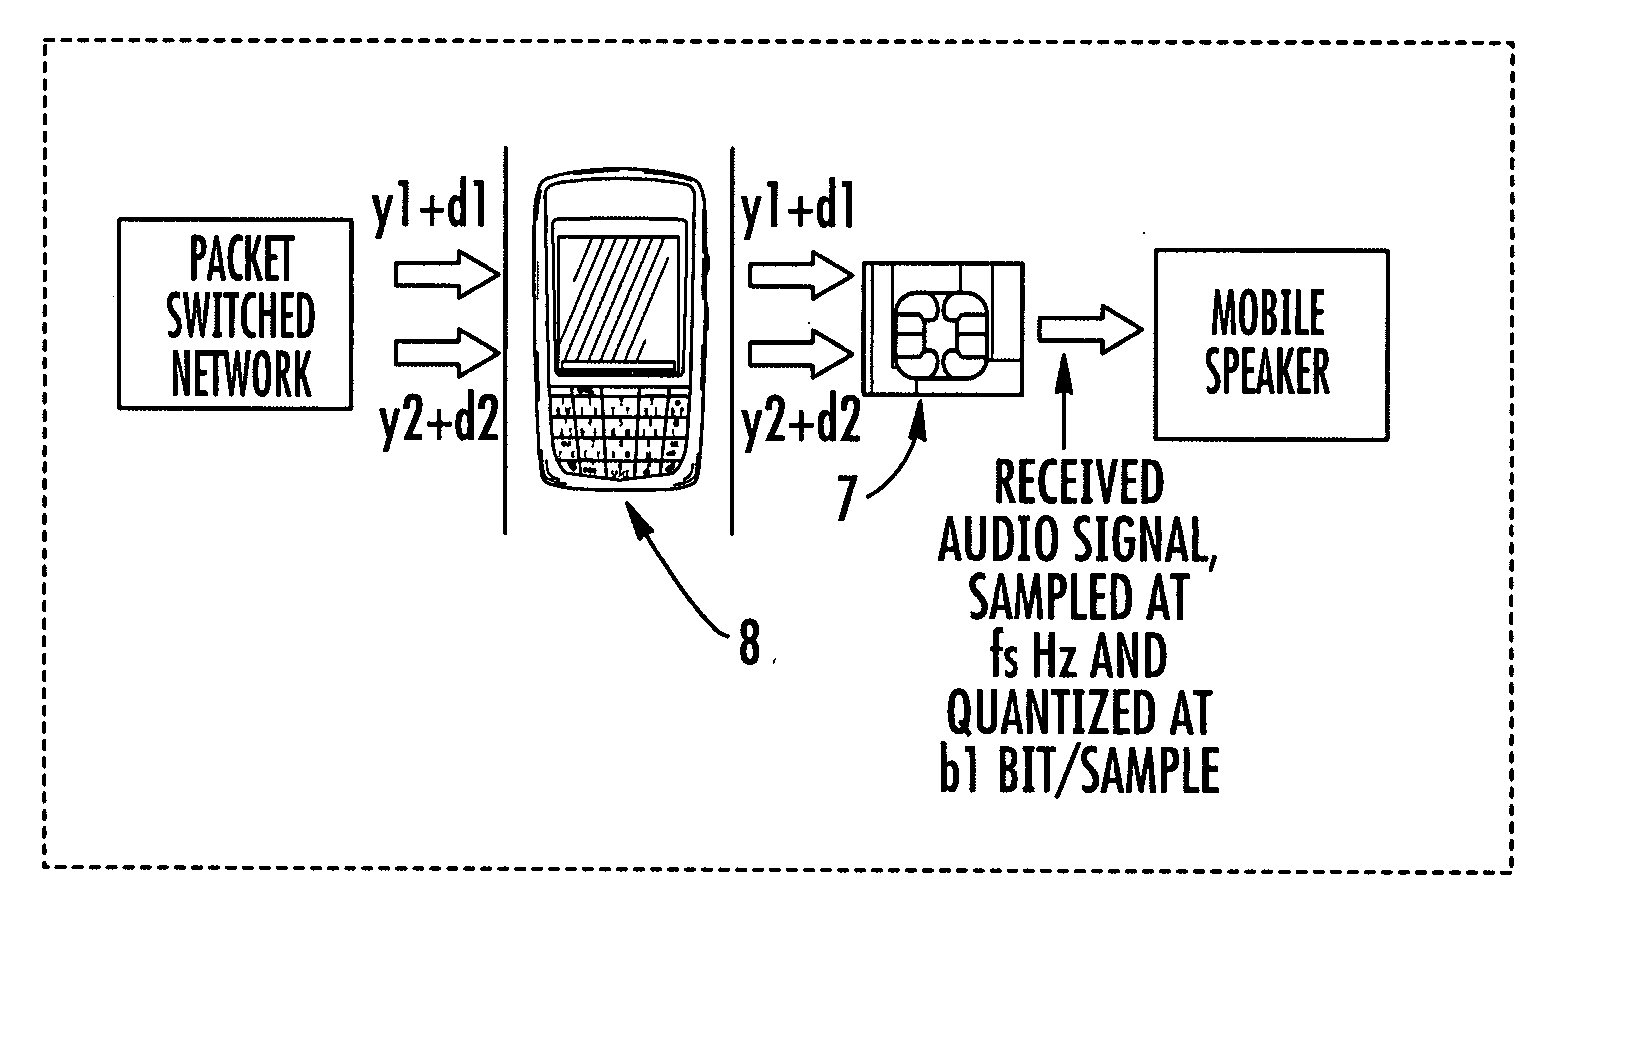 Method for implementing voice over IP through an electronic device connected to a packed switched network